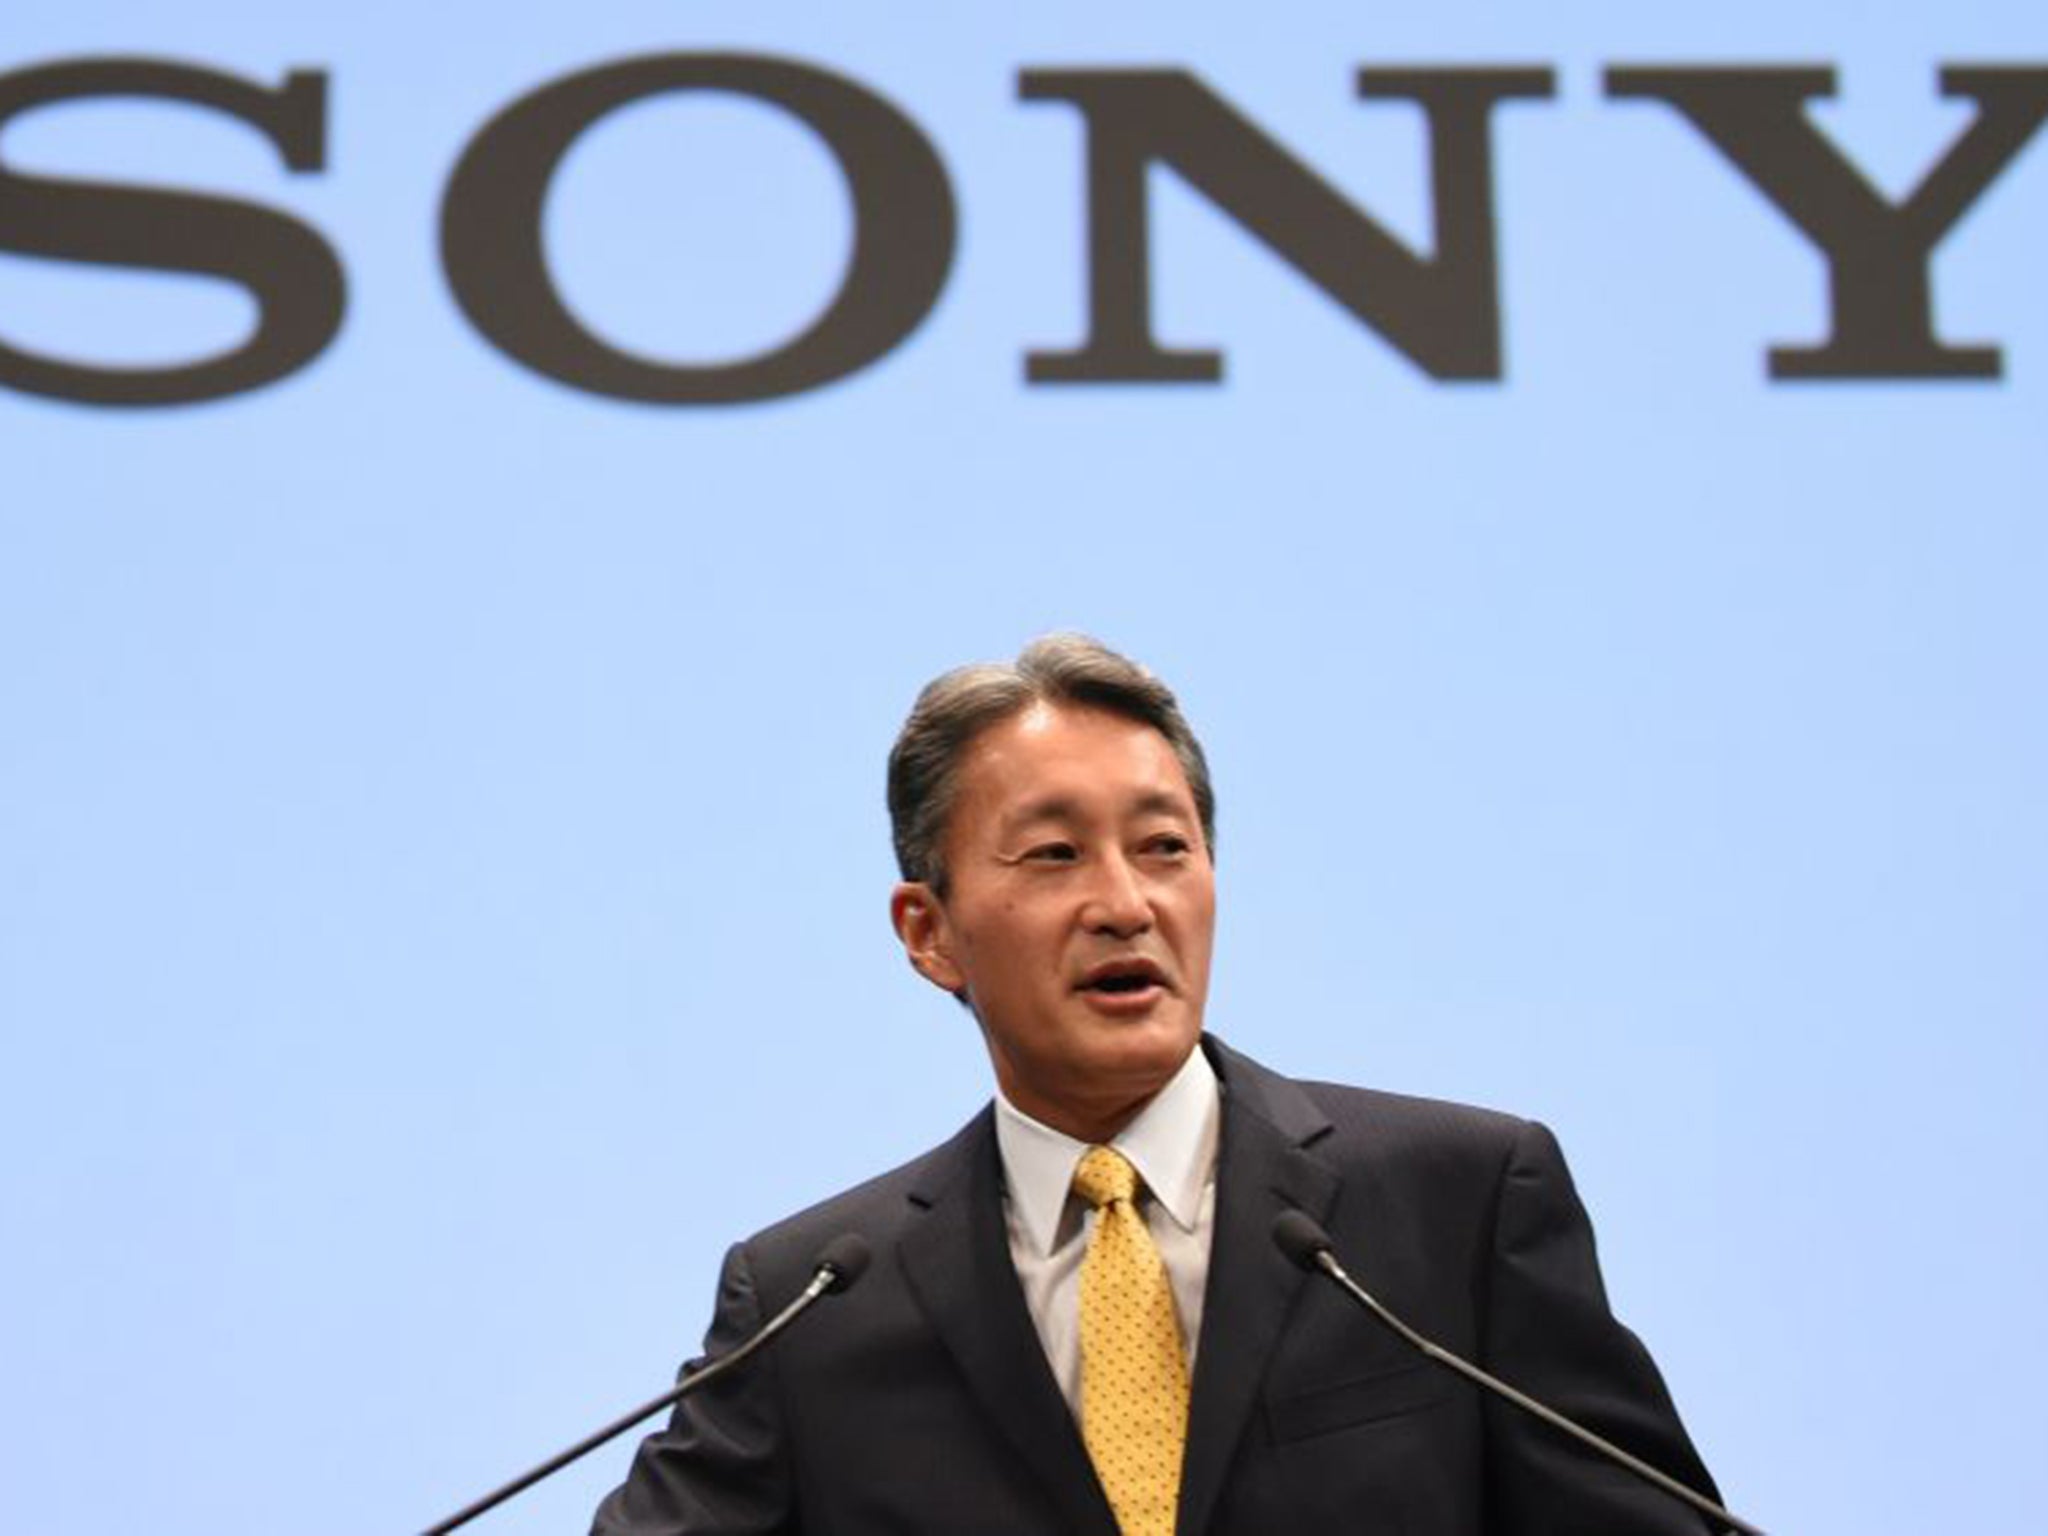 Sony's Japanese CEO Kazuo Hirai intervened, insisting a scene was made less gratuitous (AFP/Getty)